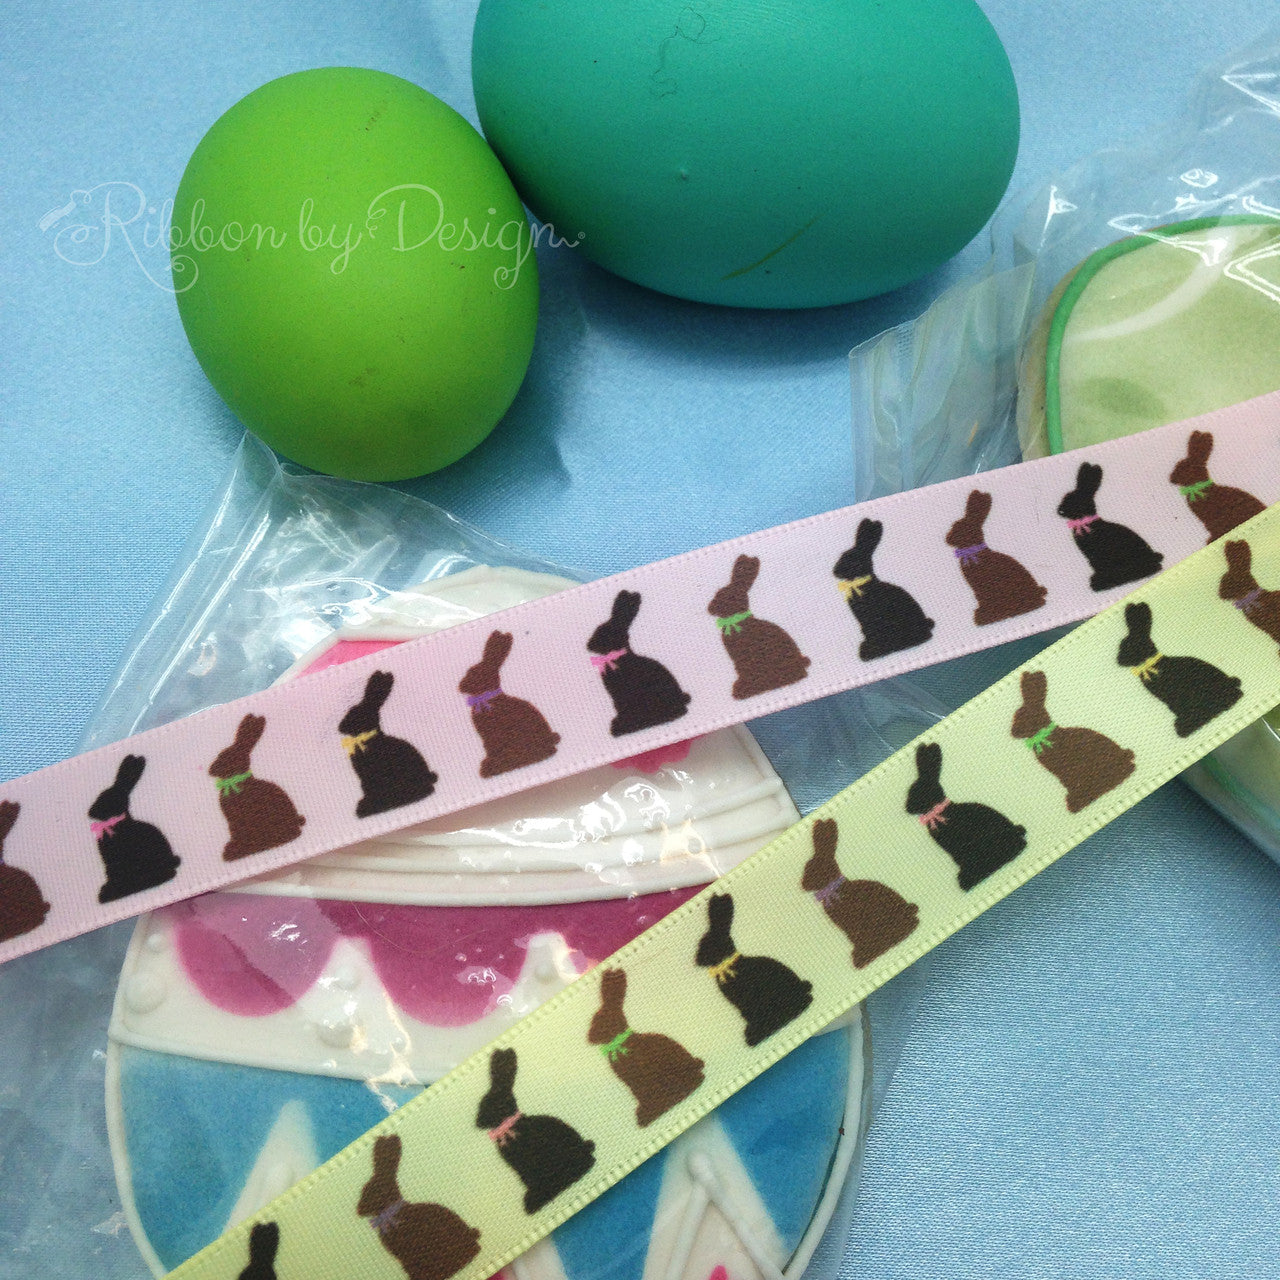 Chocolate bunnies come in three different colors and this special ribbon also wishes the gift recipient a Happy Easter!